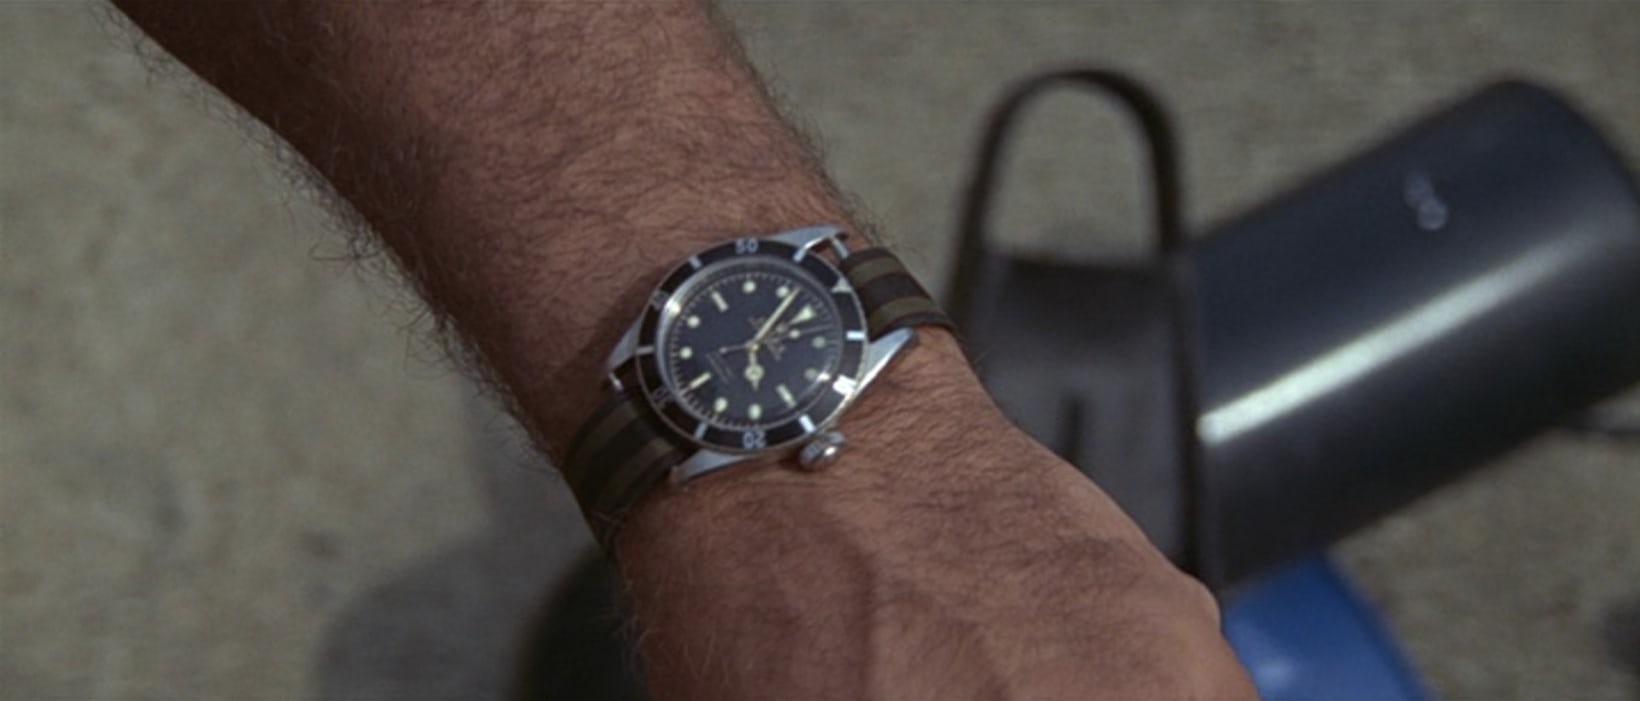 Sean Connery Passes Away At 90 - HODINKEE